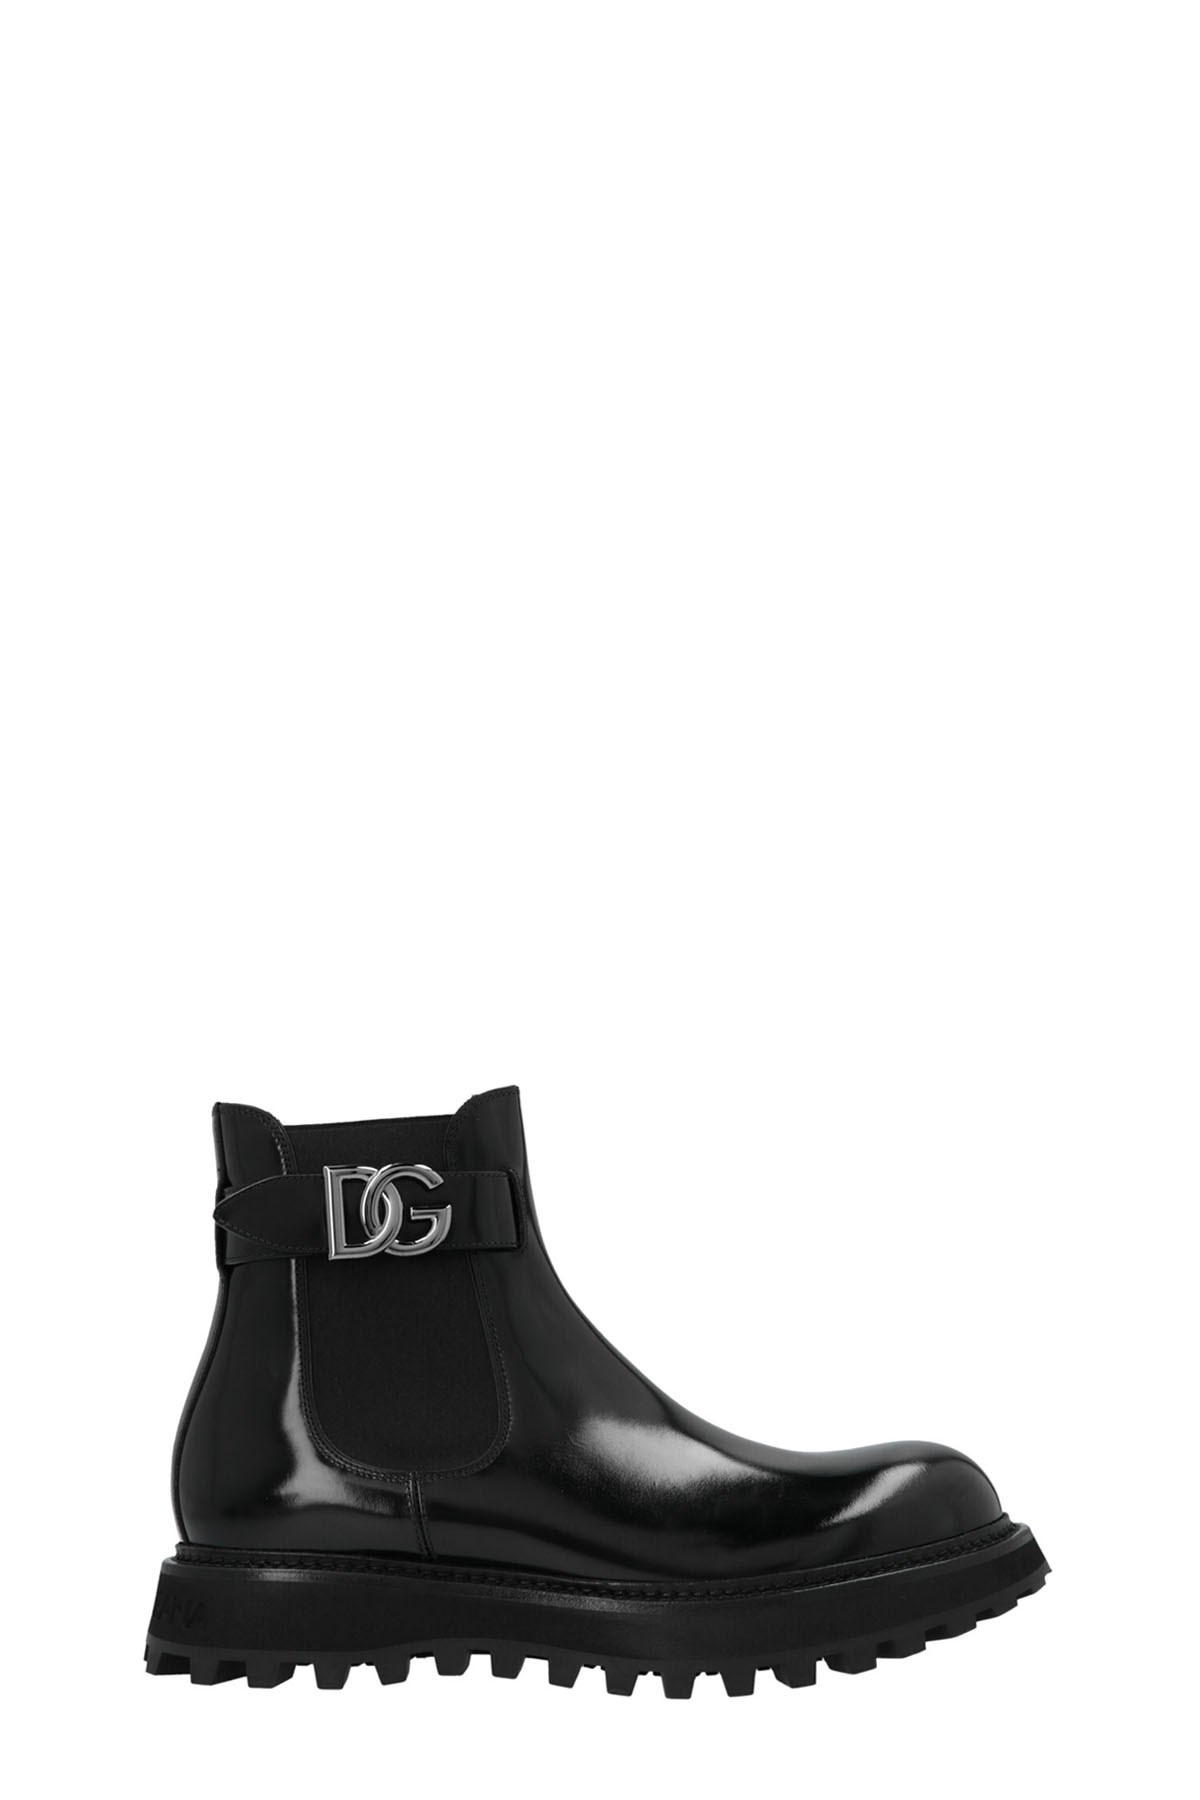 DOLCE & GABBANA Brushed Beatle Boots